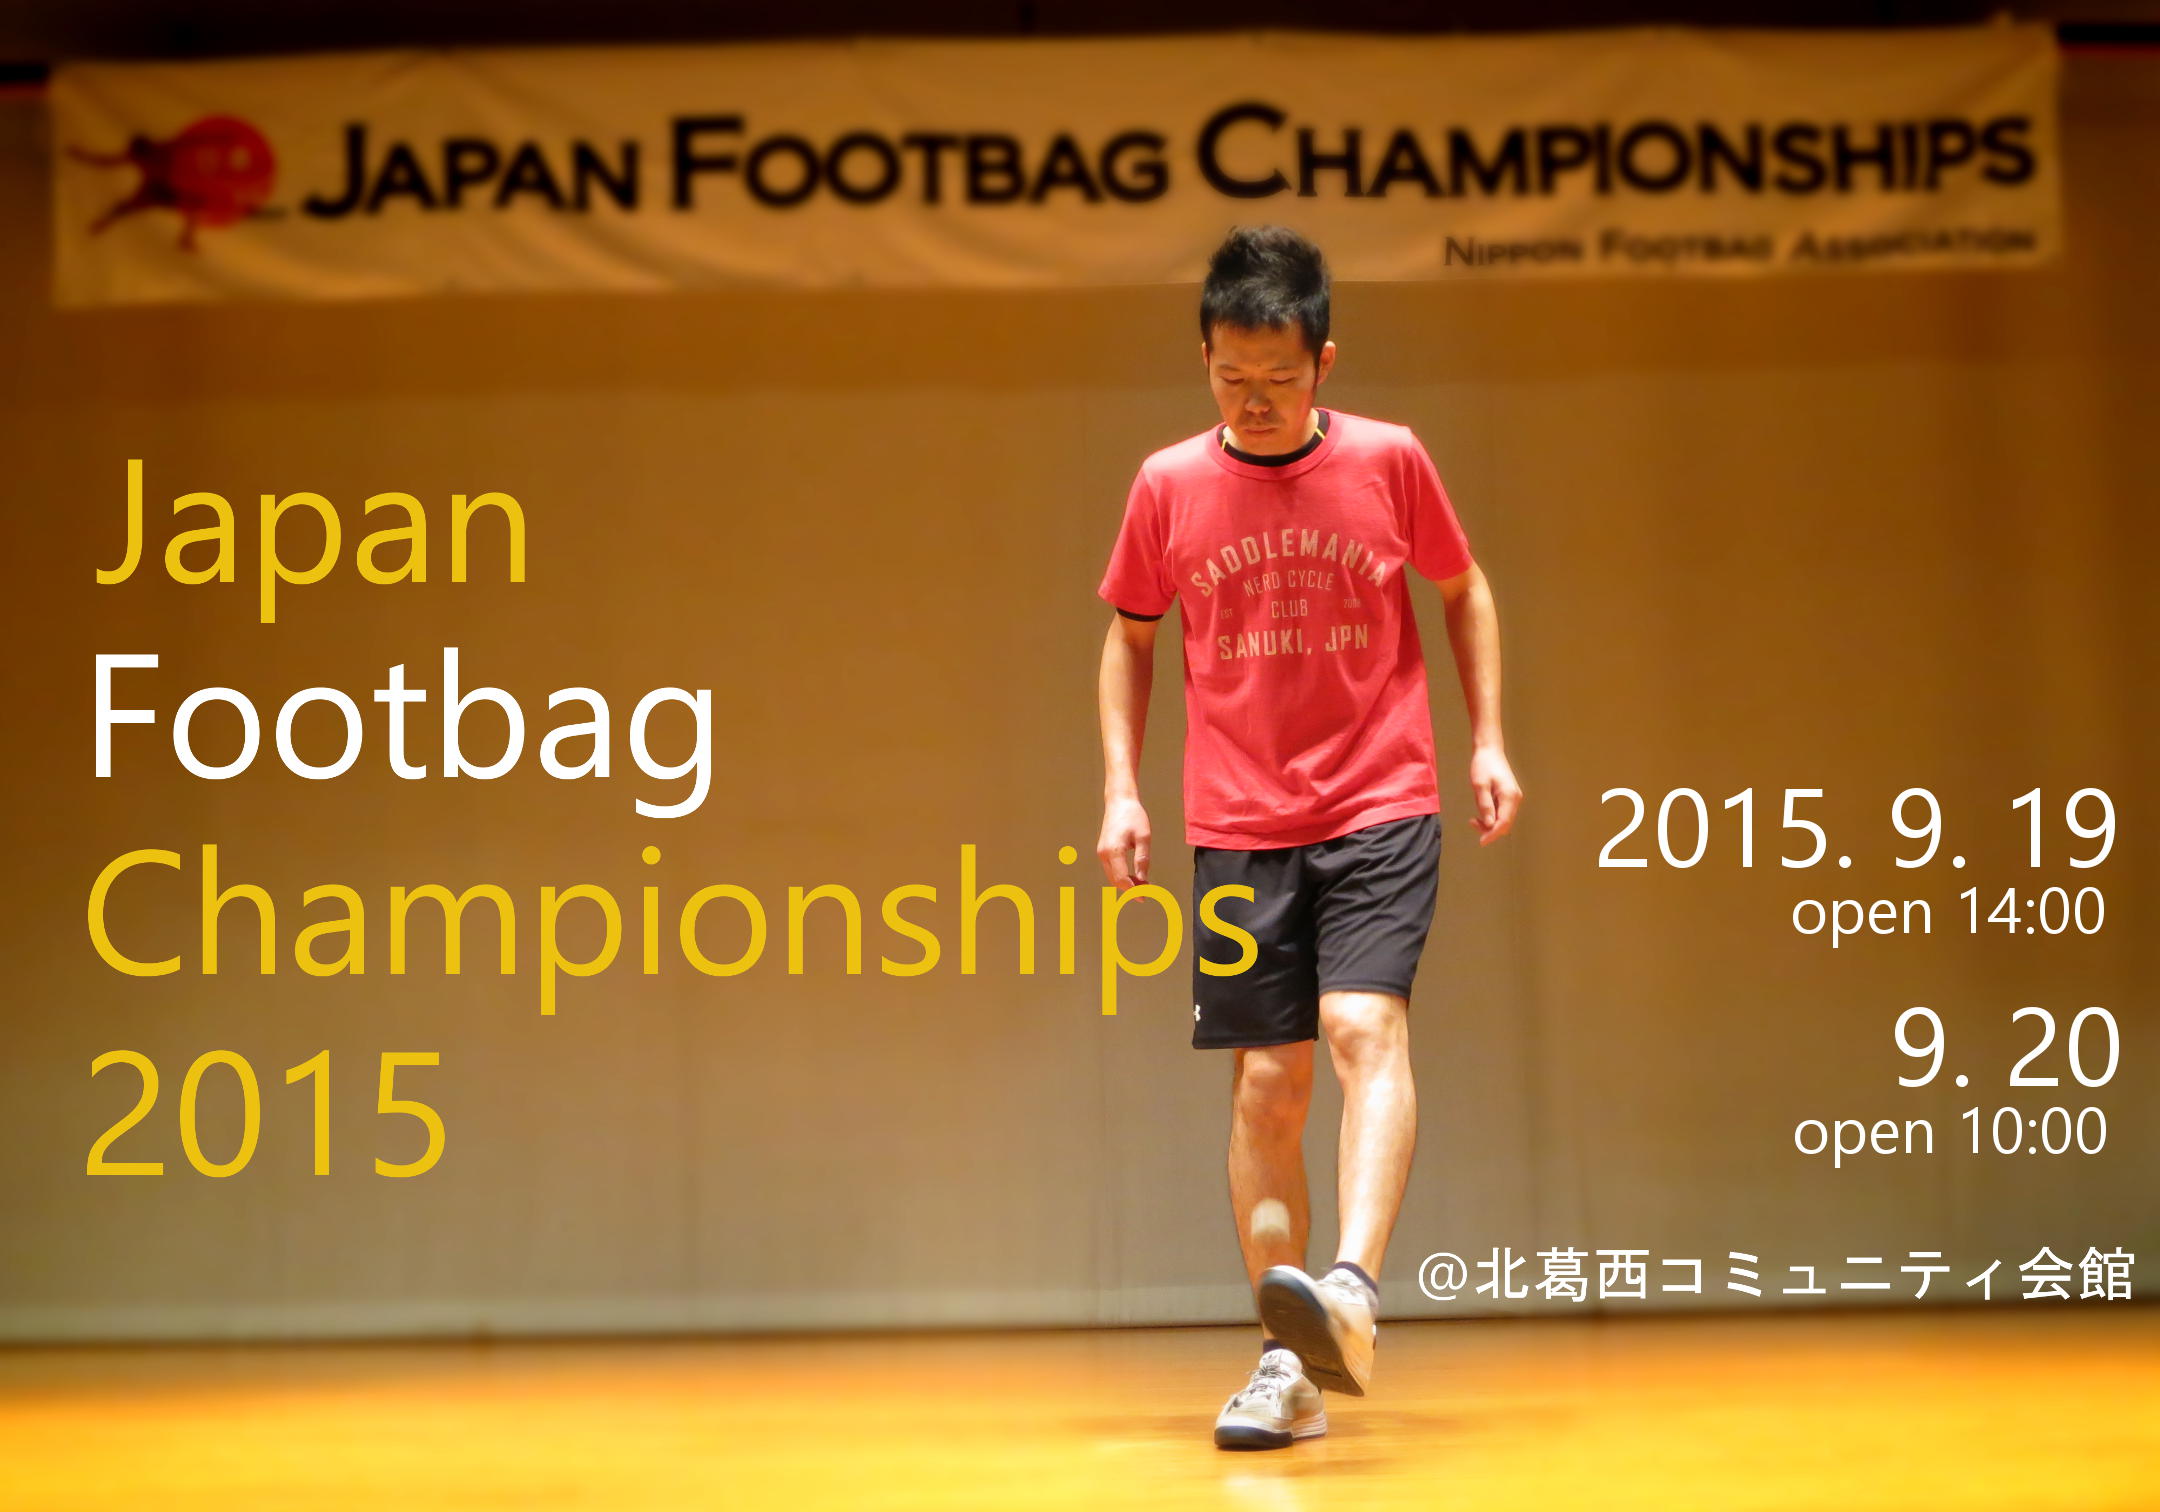 Japan Footbag Championships 2015 on Sep. 20(Open 13:00) and 21(Open 10:00)